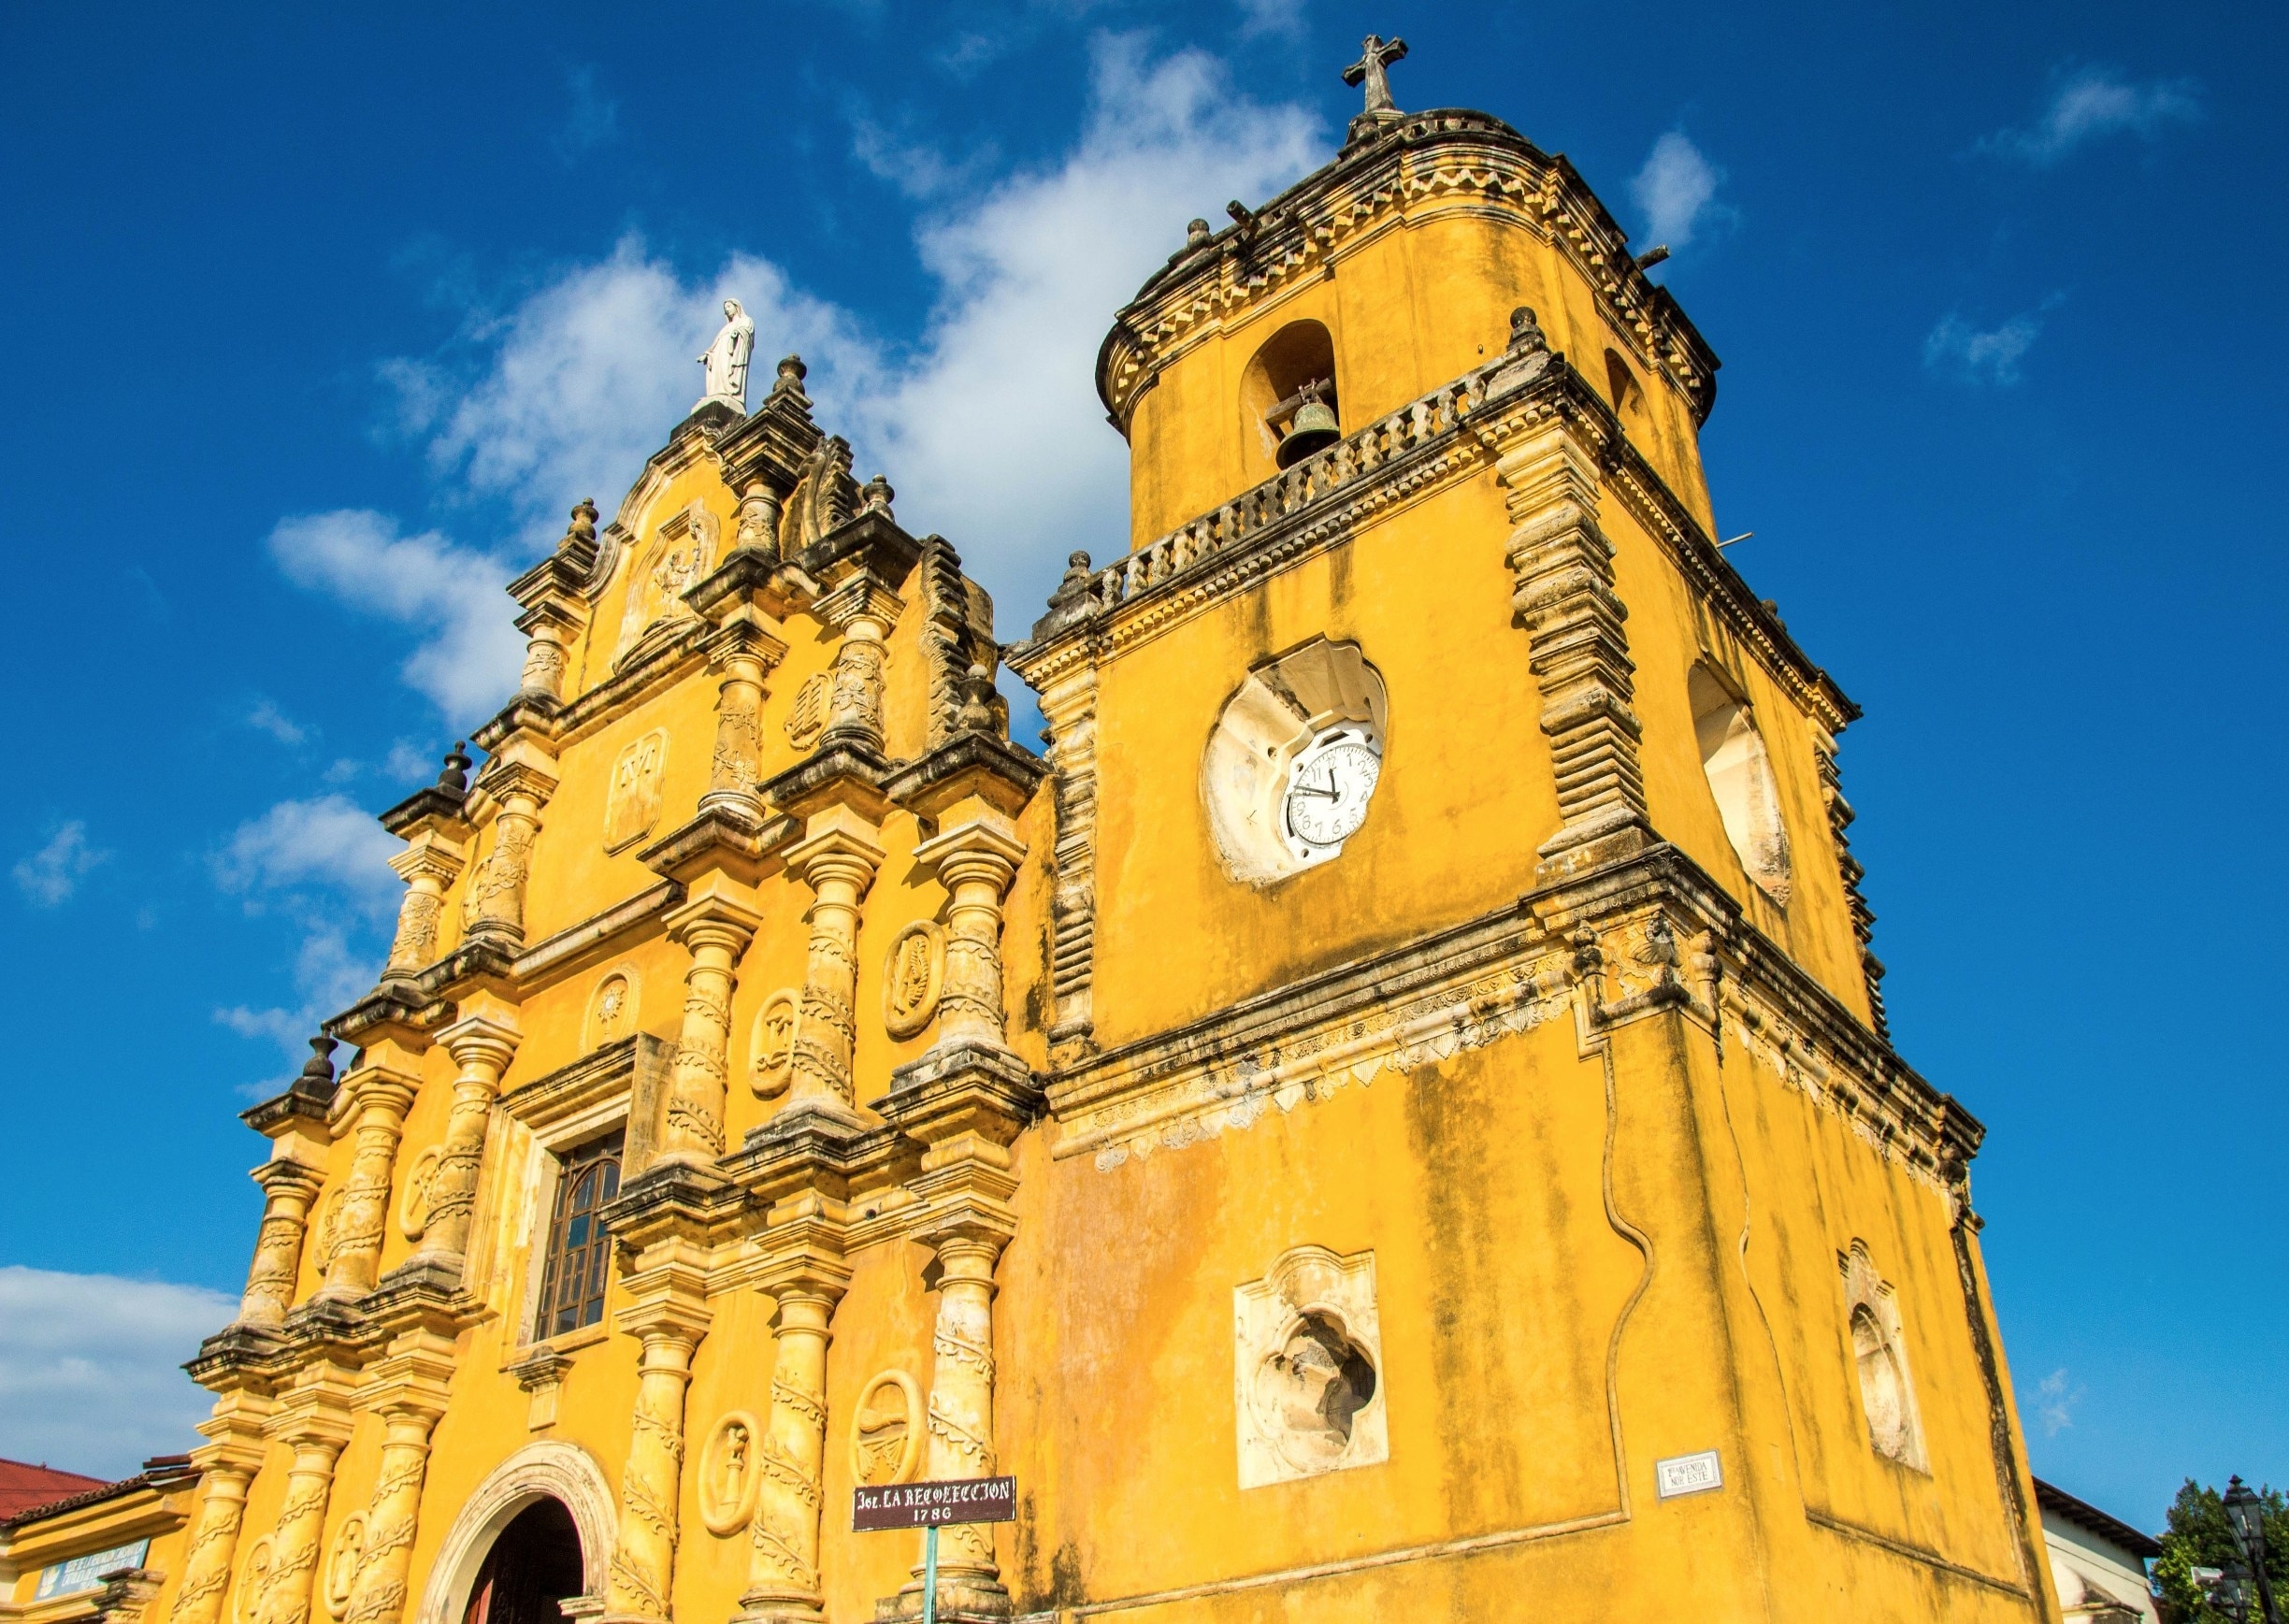 Some of the beautiful churches in León.

http://www.divebuddies4life.com/volcano-boarding-in-leon/